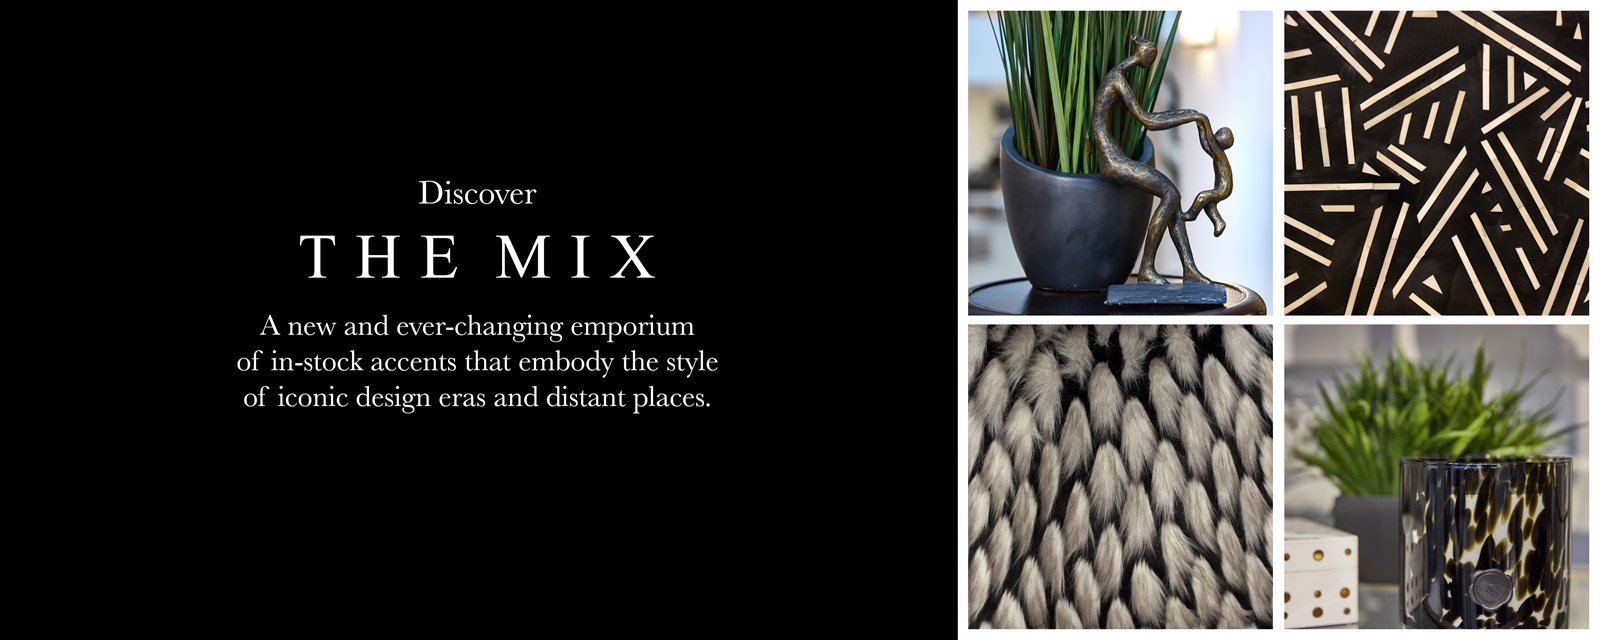 Collage of black home accents. Text: Discover The Mix. A new and ever-changing emporium of in-stock accents that embody the style of iconic design eras and distant places.